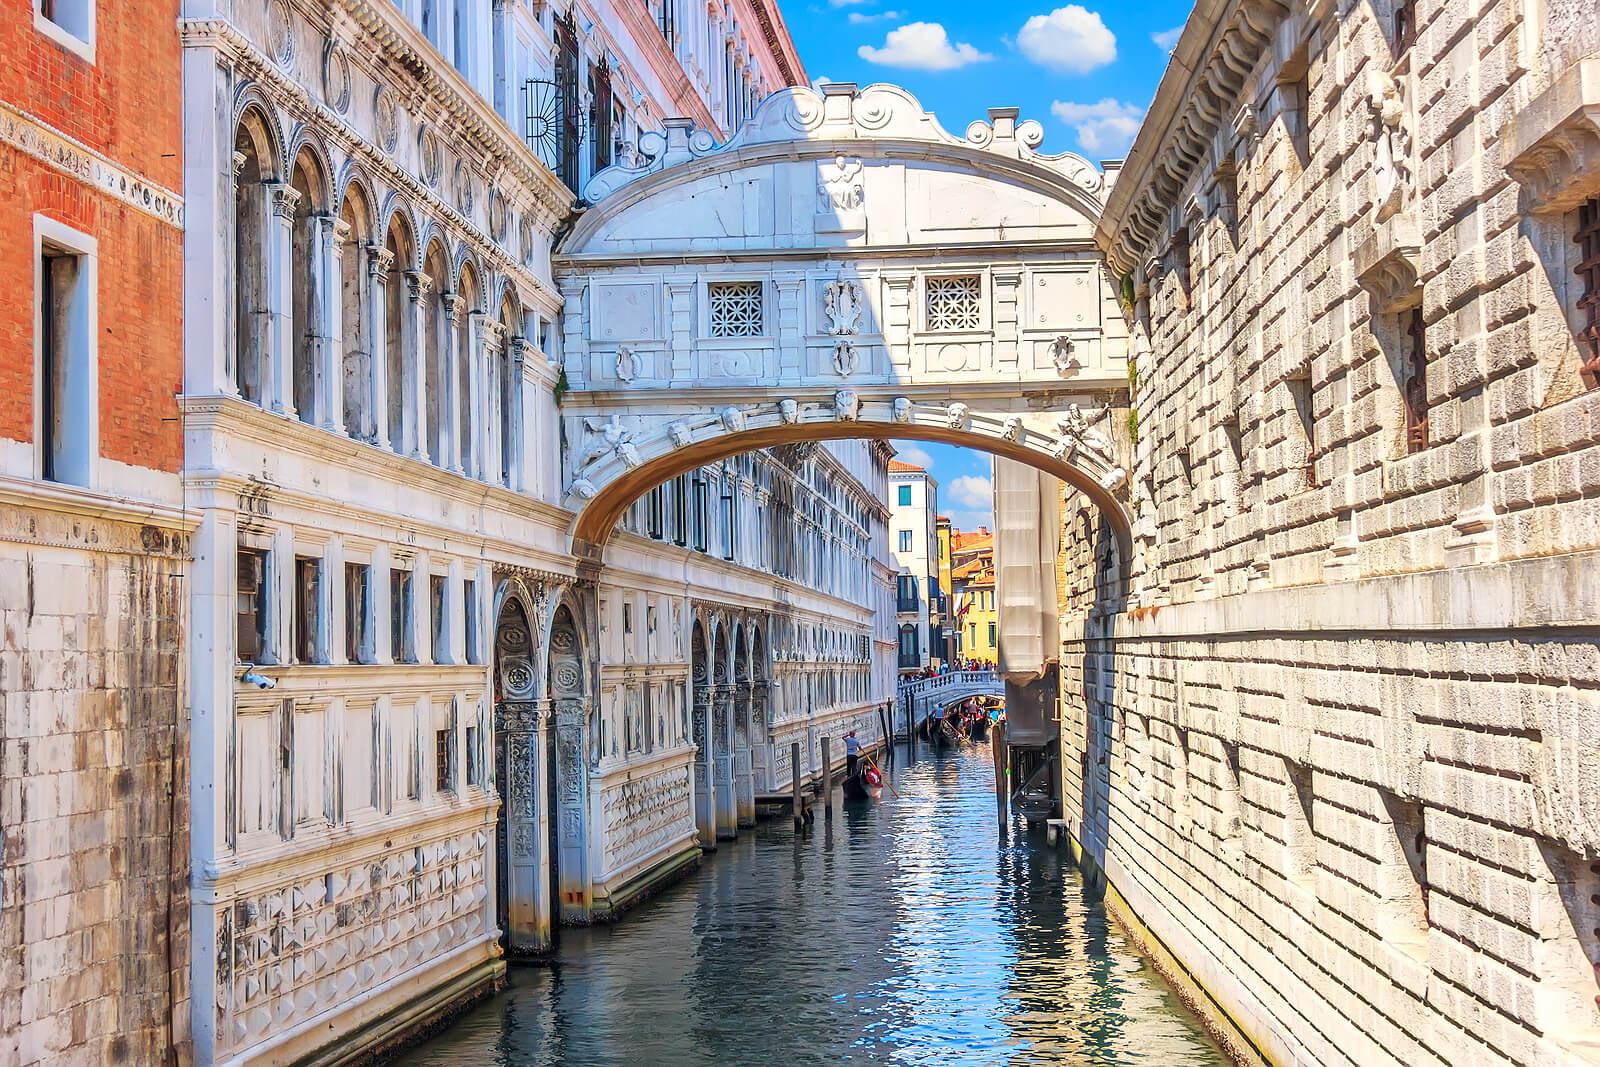 Hey, We Bet You Can’t Get Better Than 80% On This Random Knowledge Quiz Bridge of Sighs, Venice